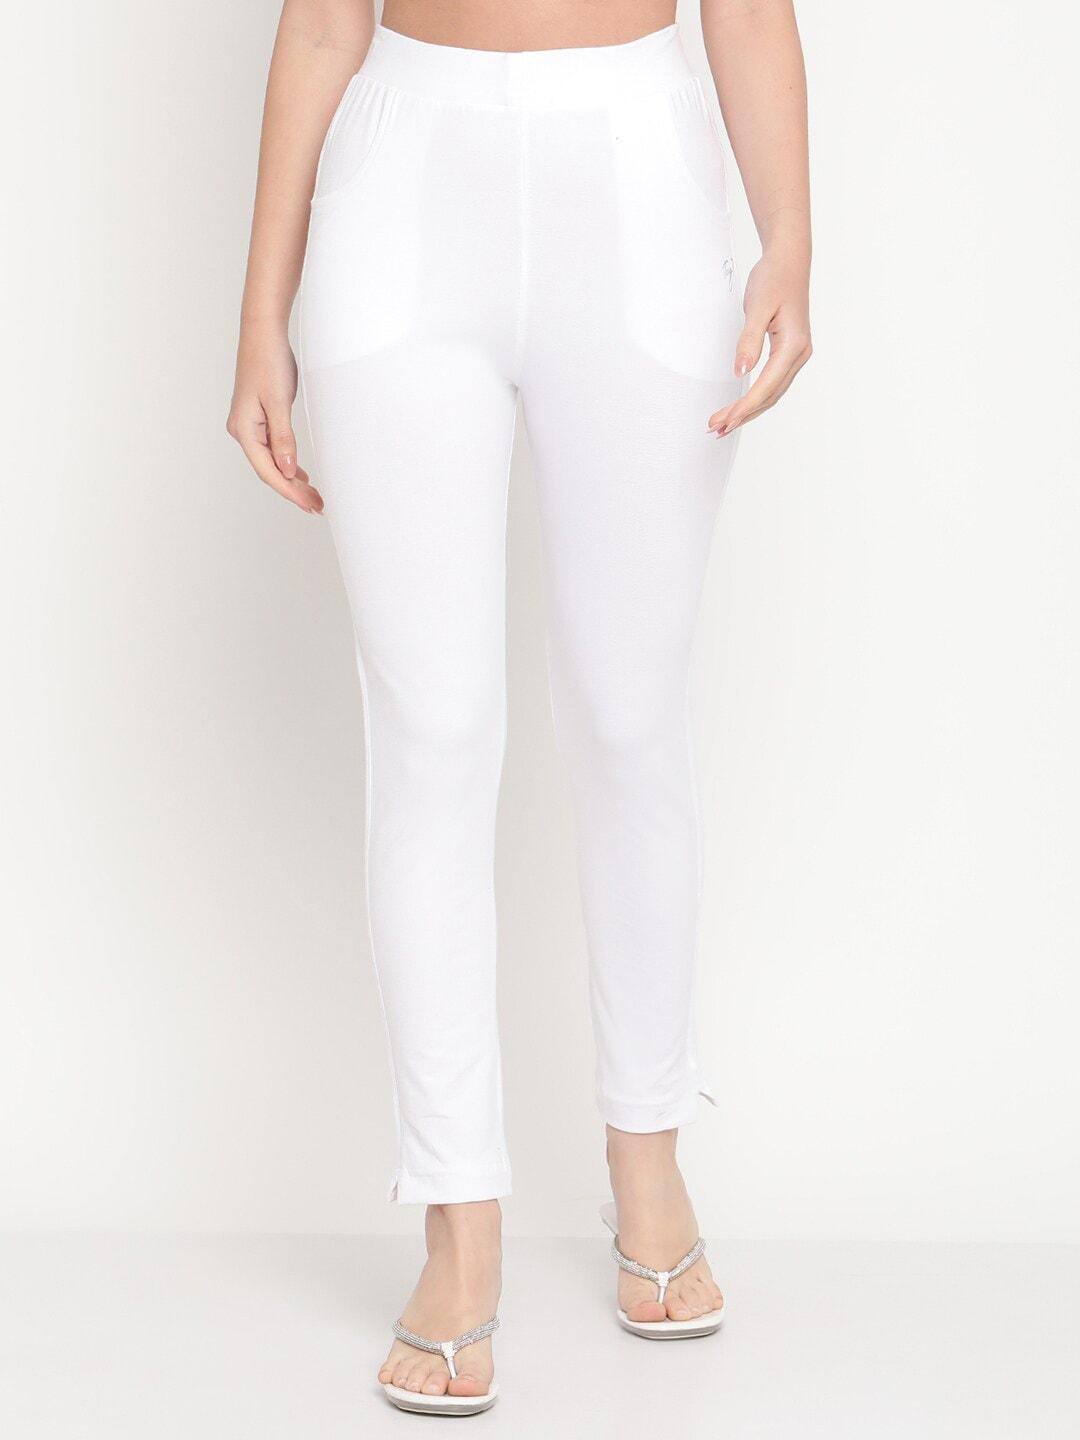 TAG 7 Women White Solid Comfortable-Fit Jeggings